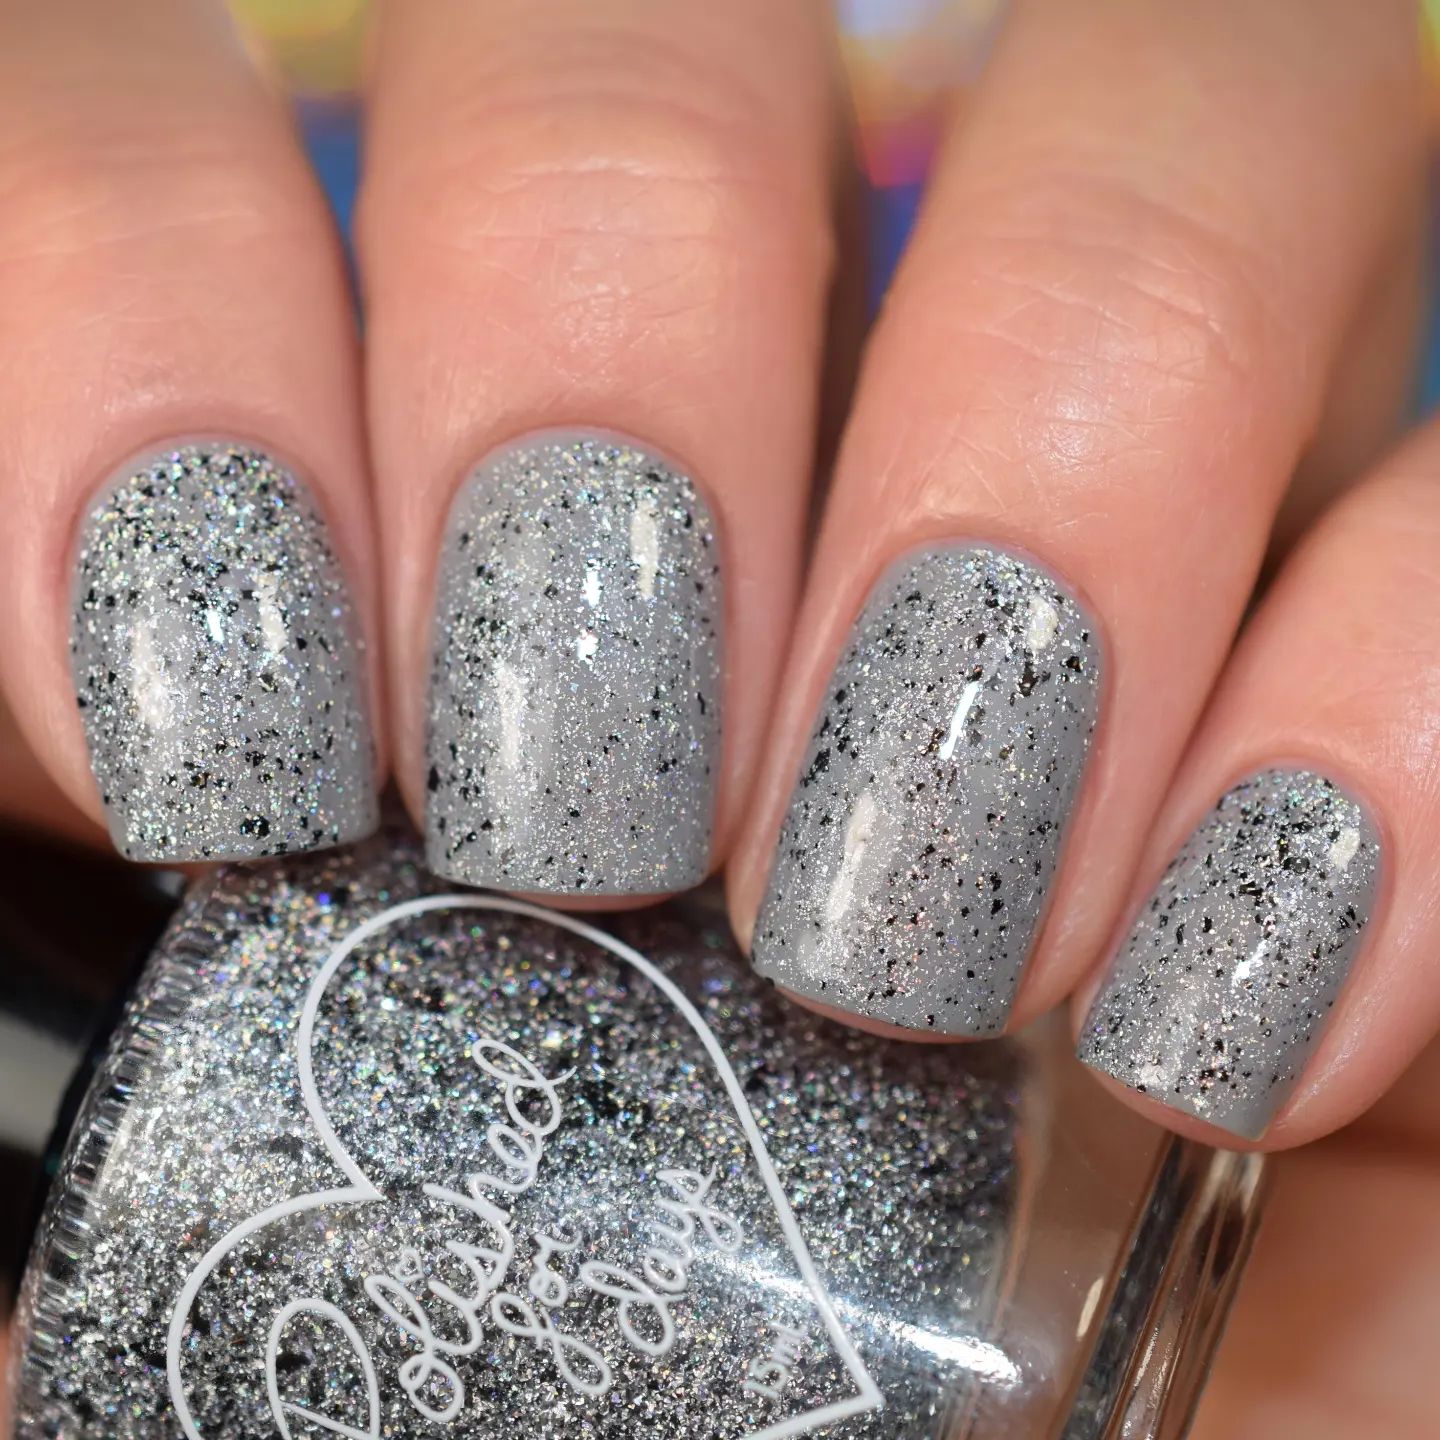 Silvery glittered nails are a great way to add some sparkle to your look. They're a great way to spice up your everyday manicure, or even just to add some bling for a special occasion.